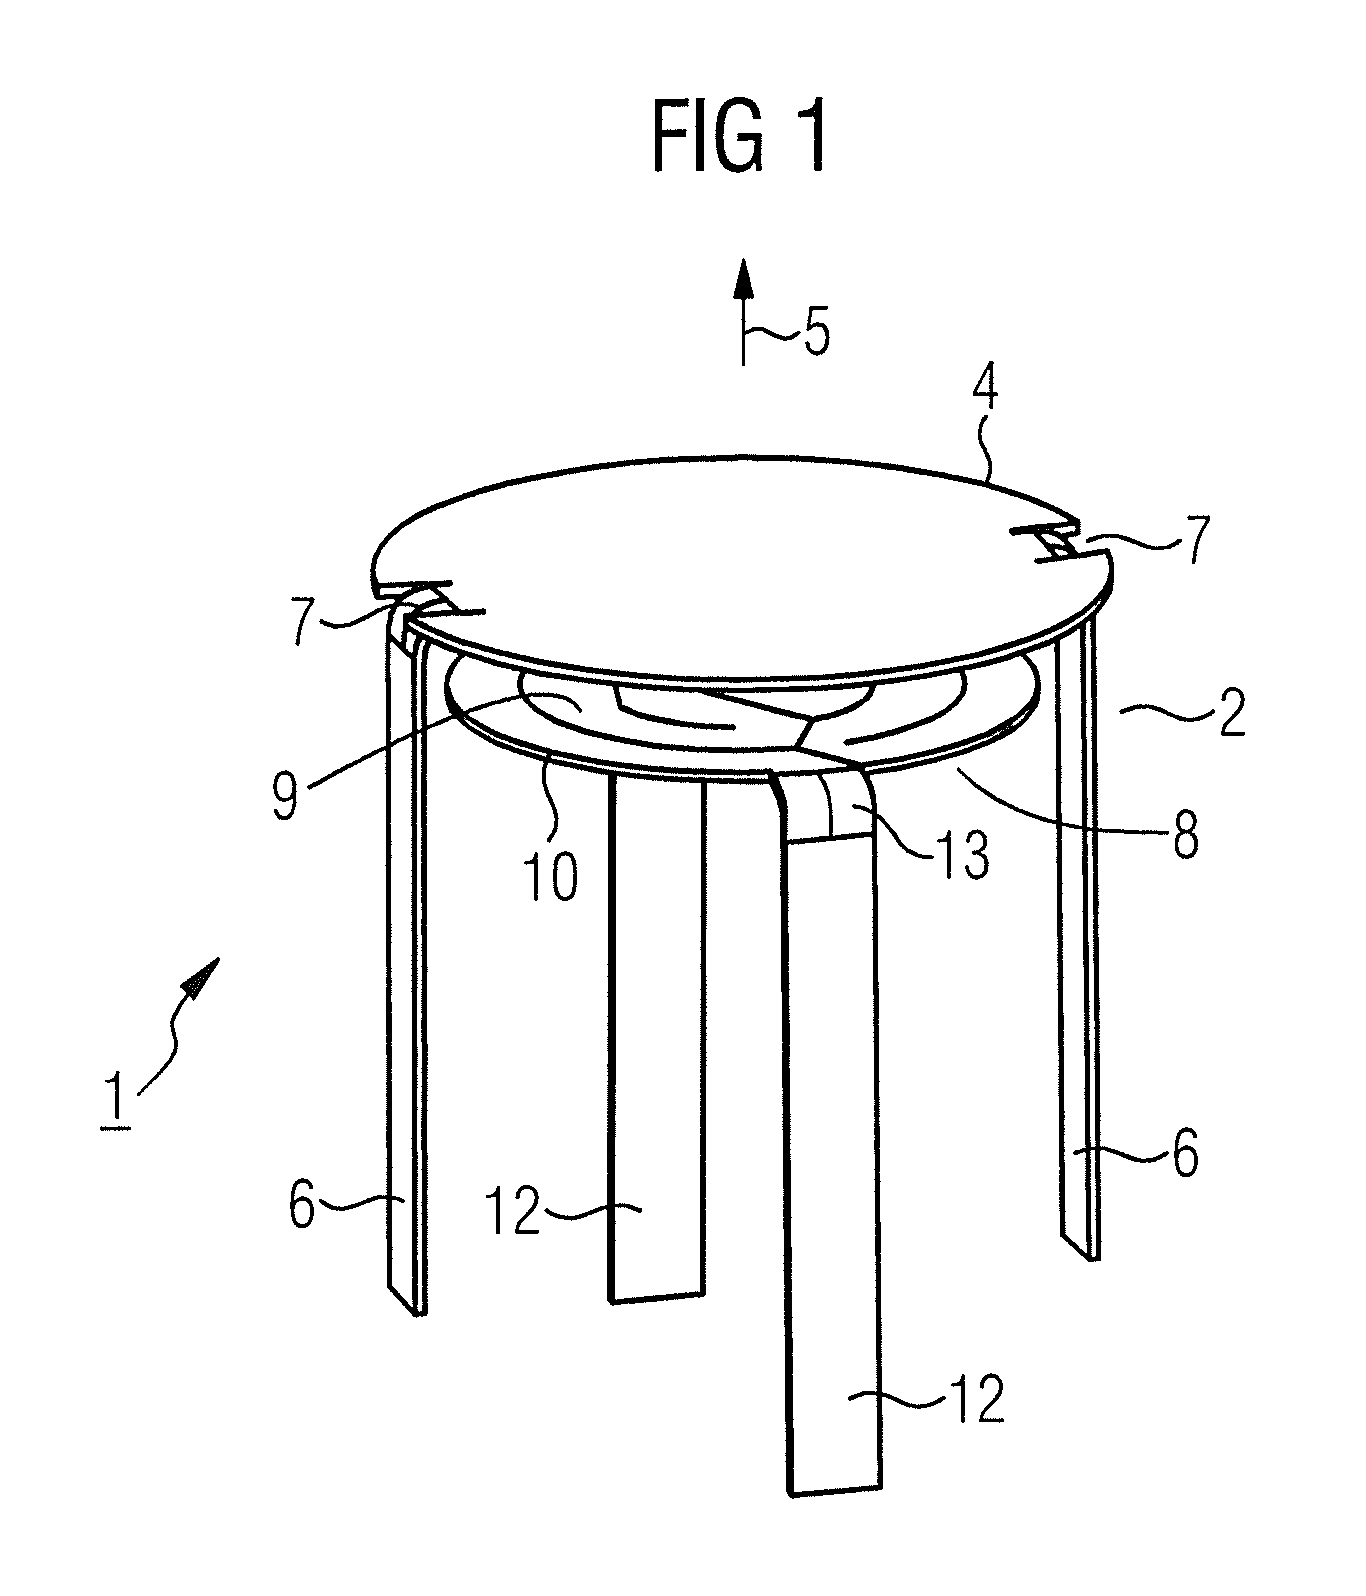 Thermionic emission device